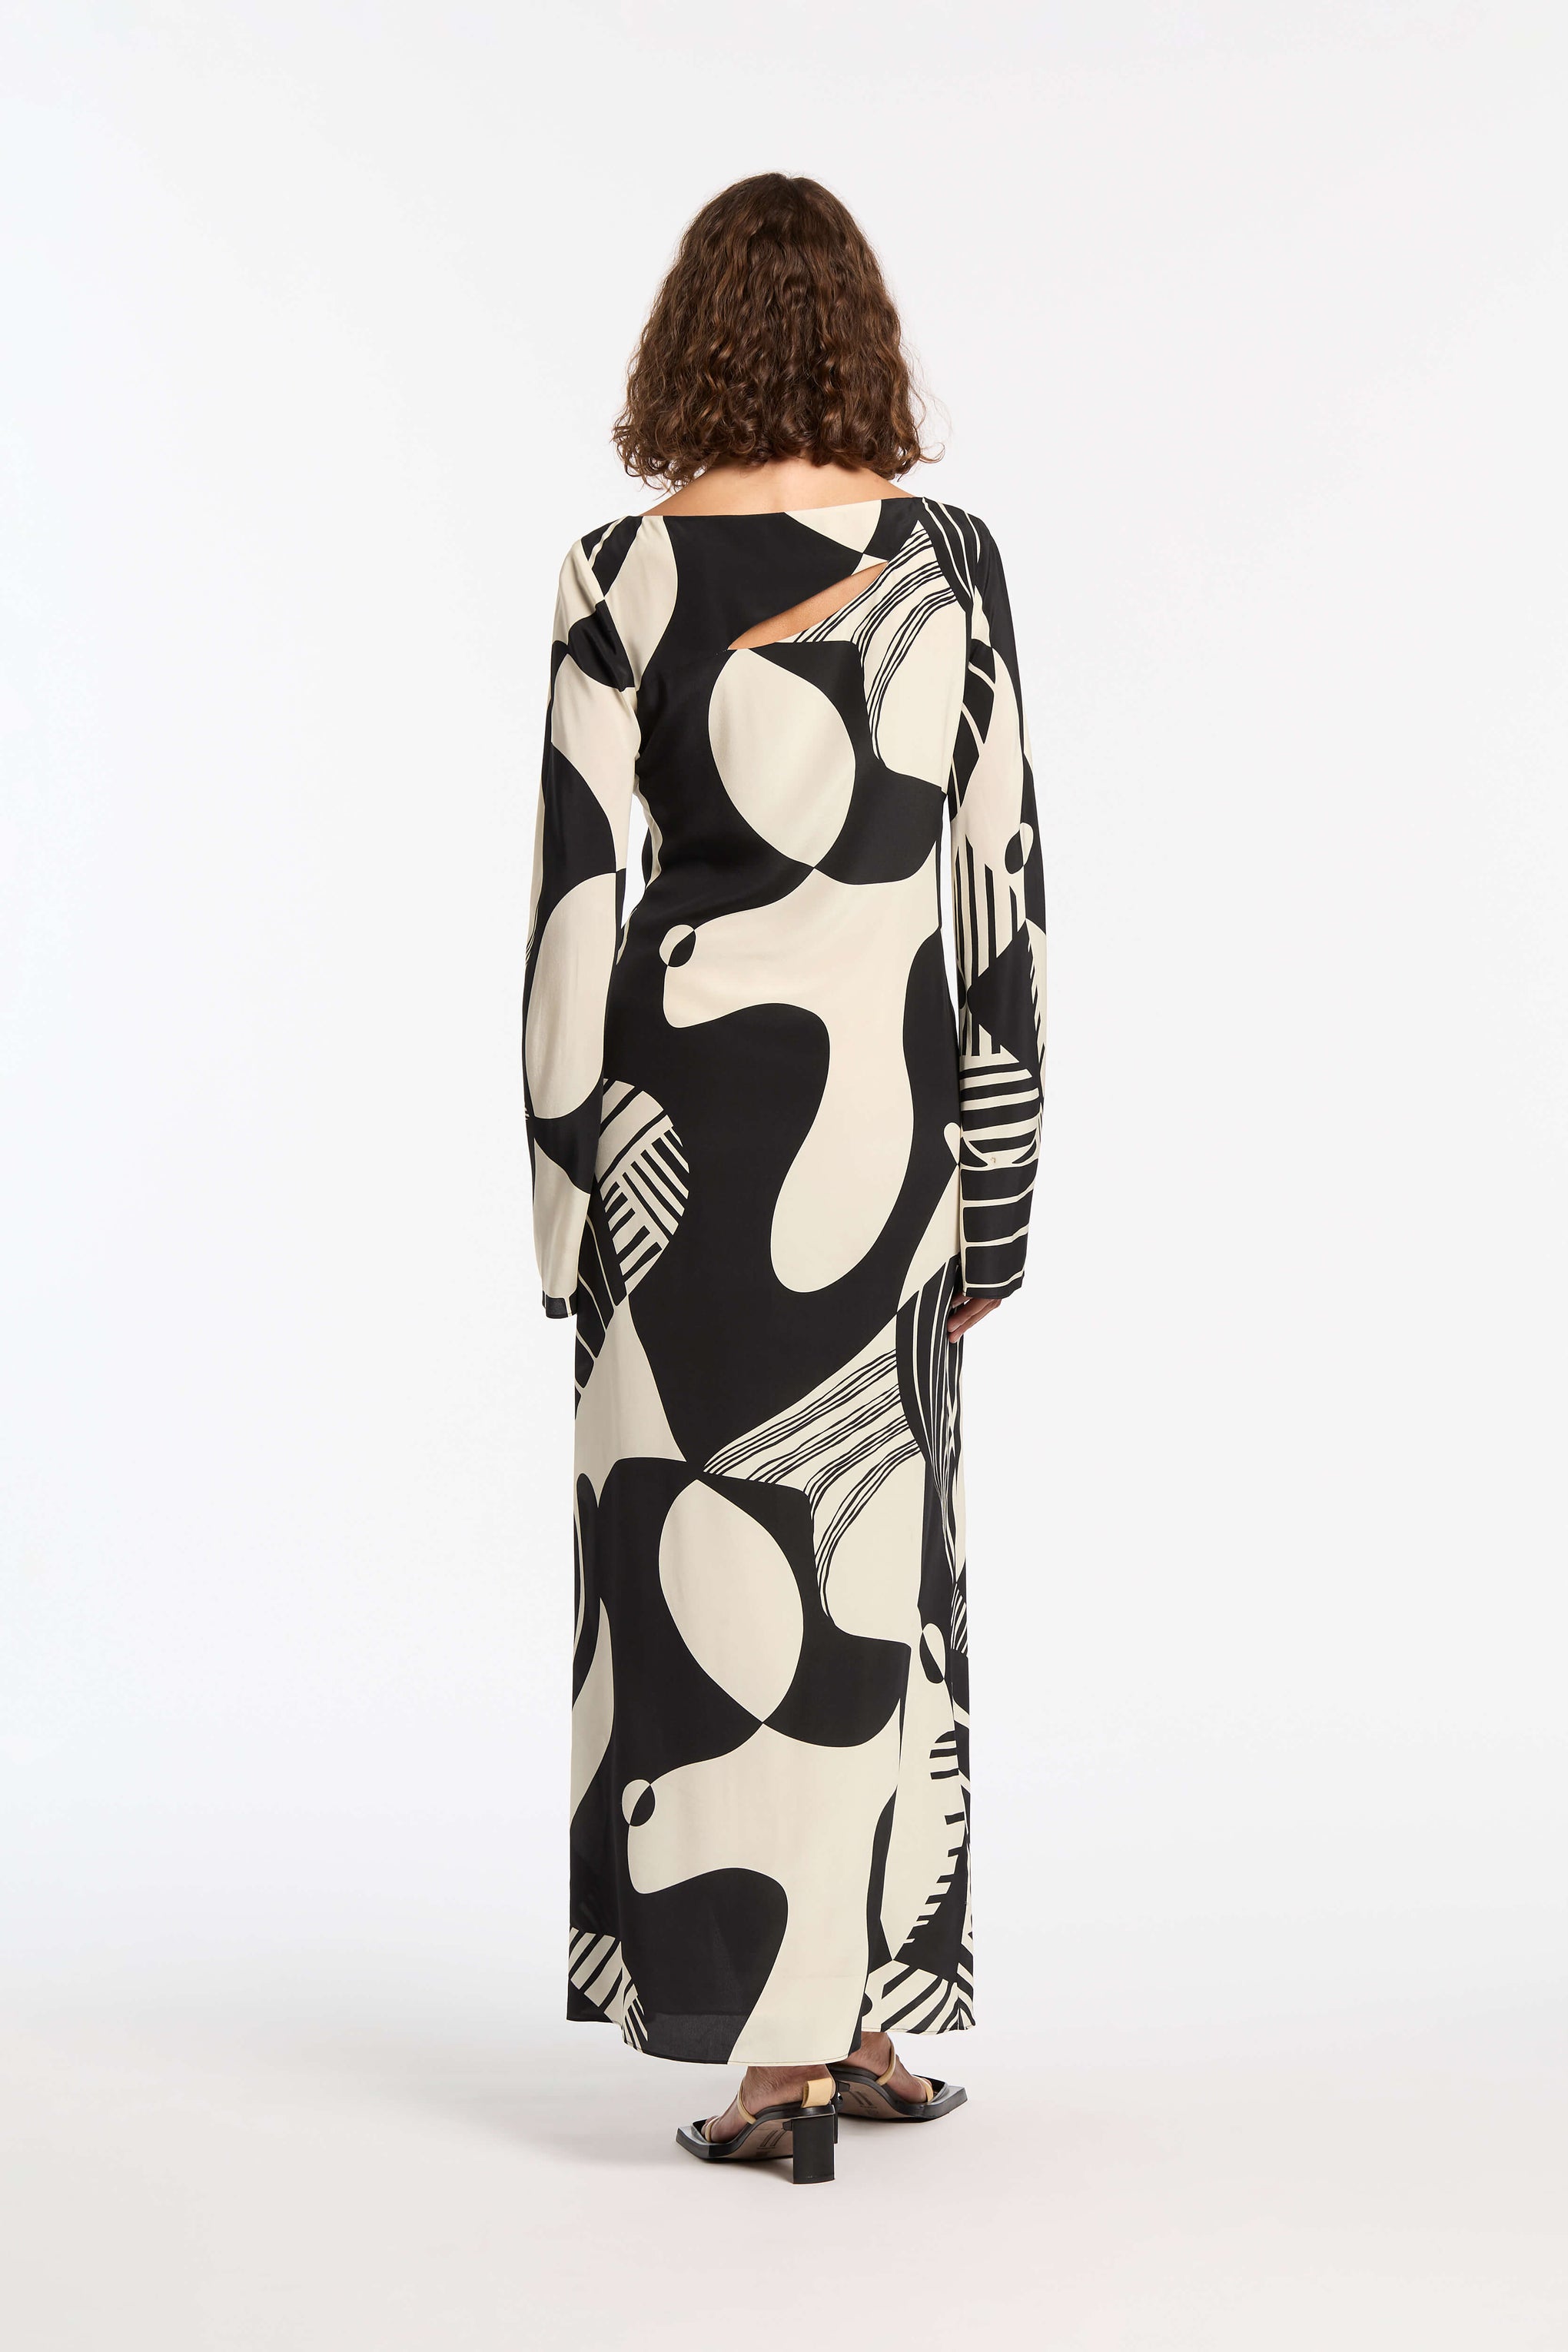 SIR Realisme Twist Maxi Dress in Papier available at TNT The New Trend Australia.